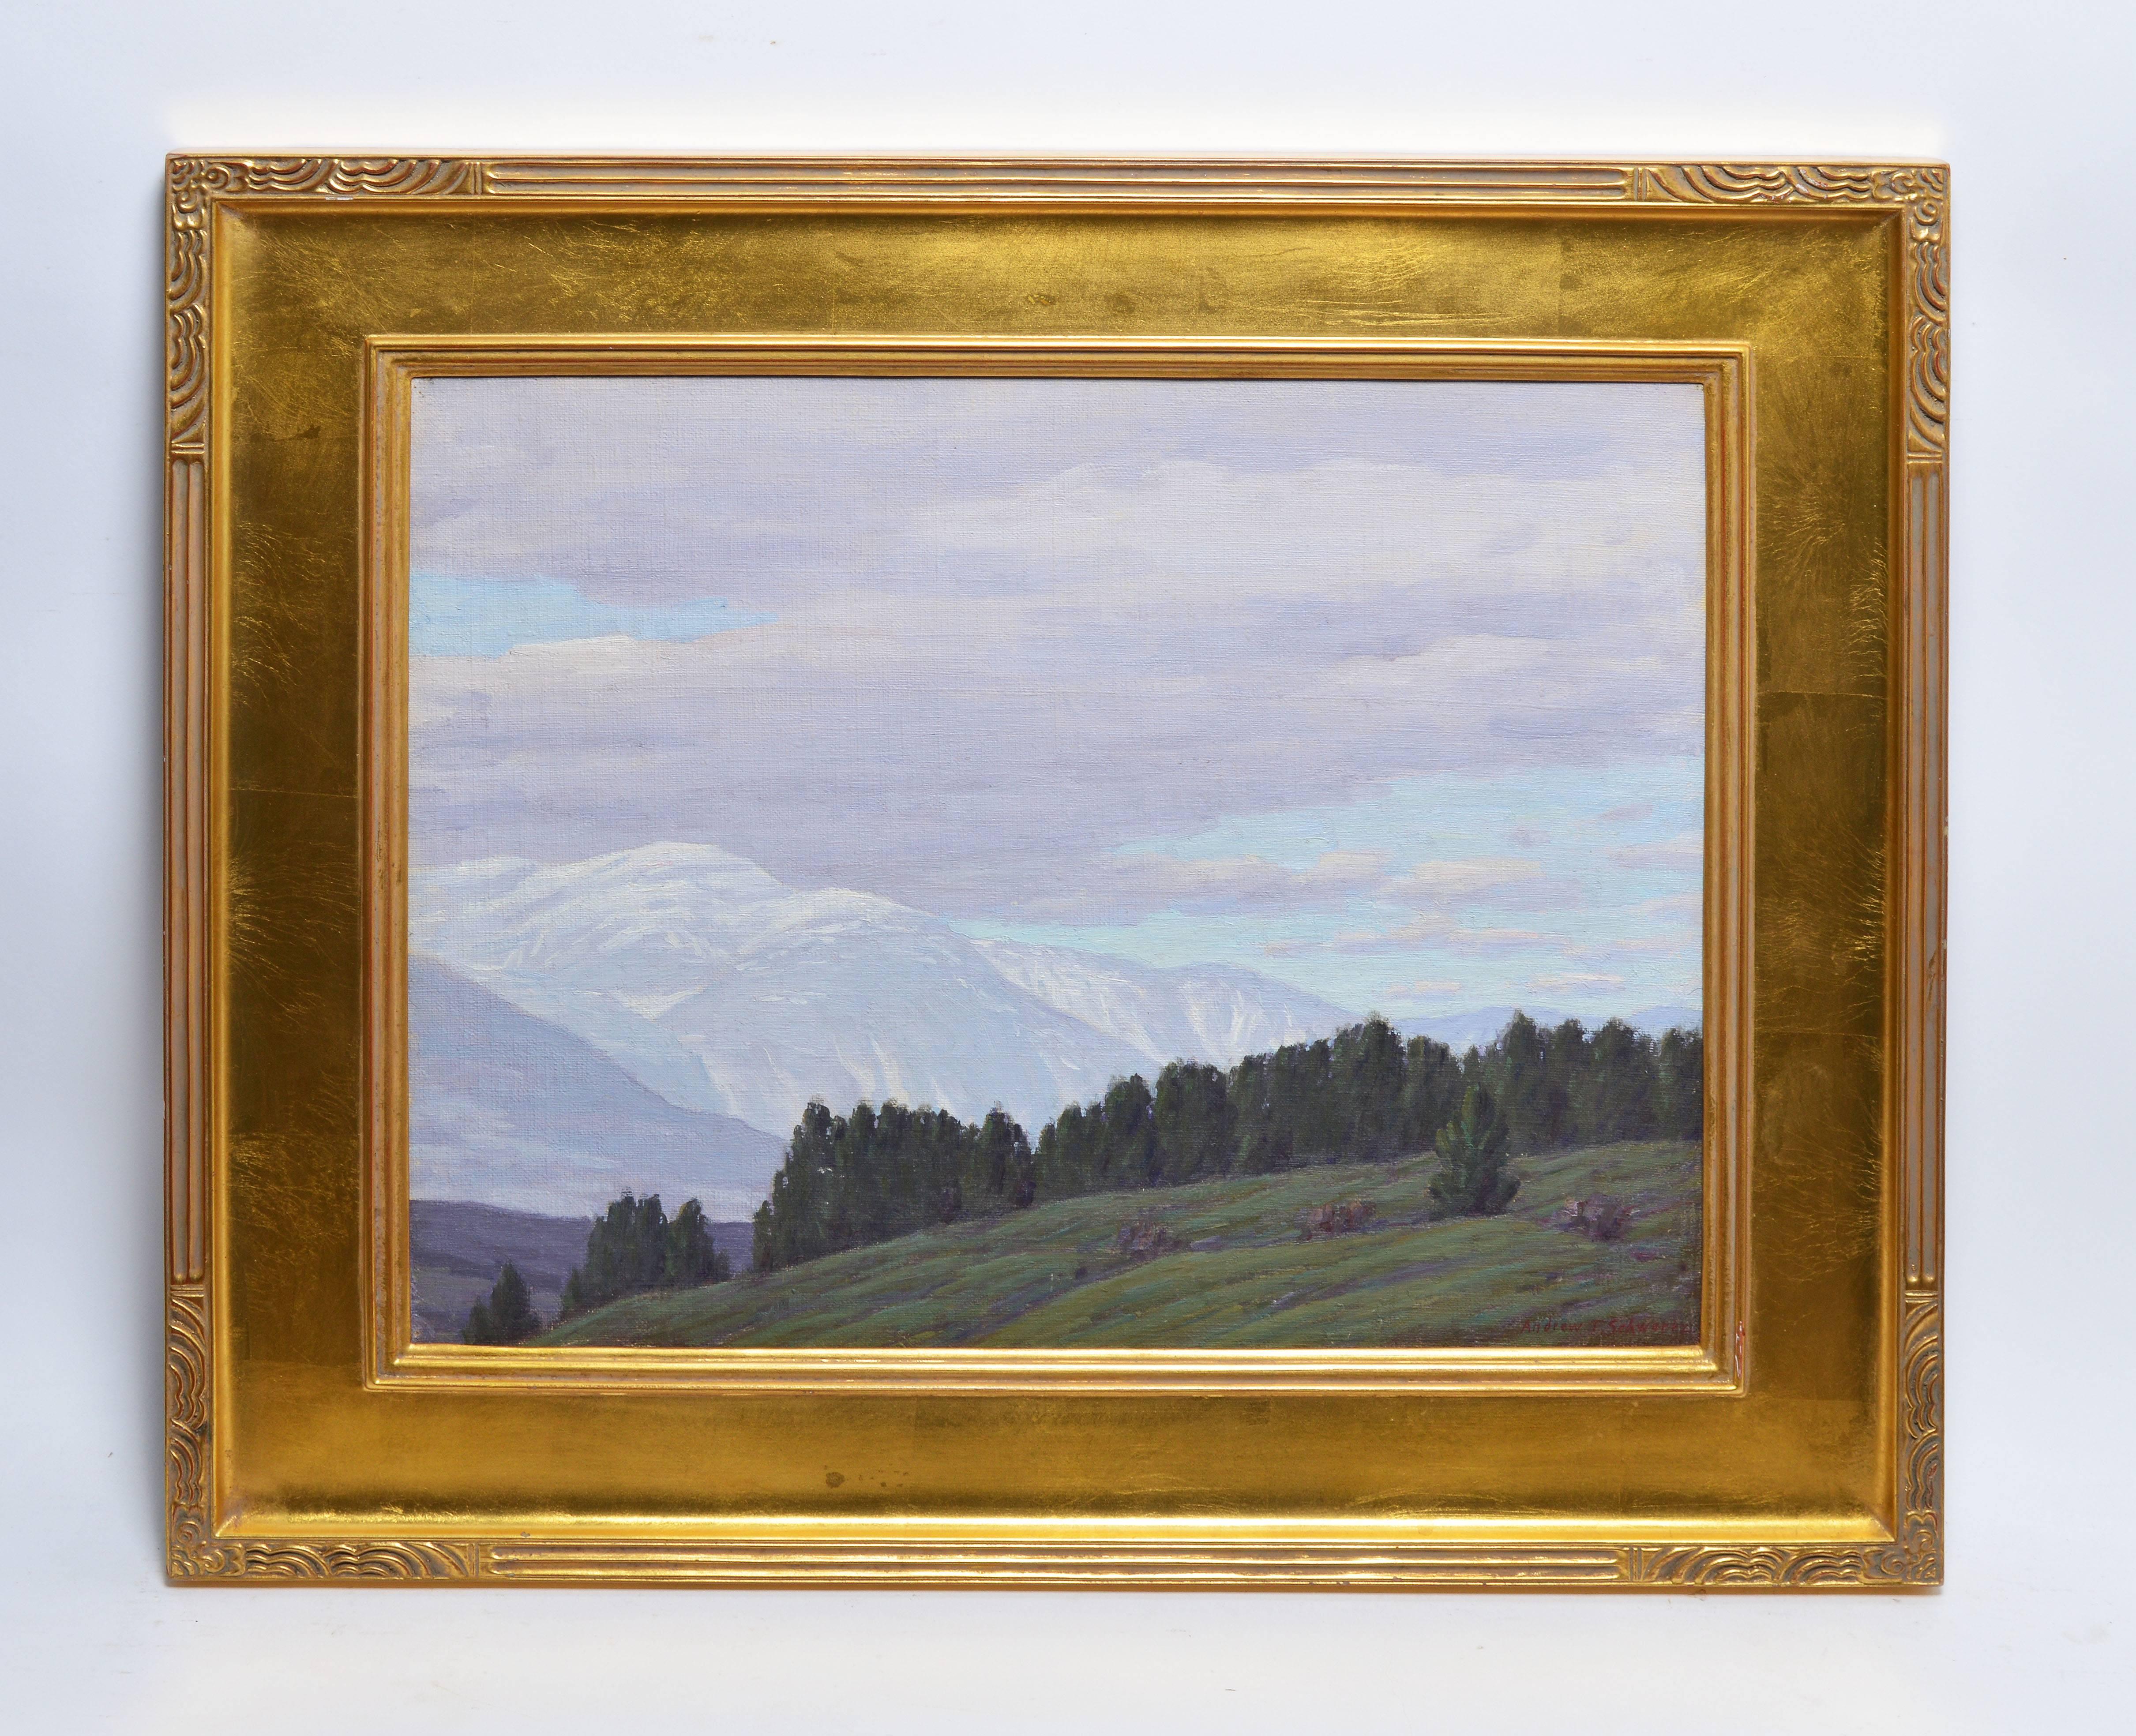 Impressionist mountain landscape by Andrew Thomas Schwartz (1867-1942).  Oil on board, circa 1920.  Signed lower right, "Andrew T. Schwartz".  Displayed in a giltwood frame.  Image size, 20"L x 16"H, overall 27"L x 23"H.